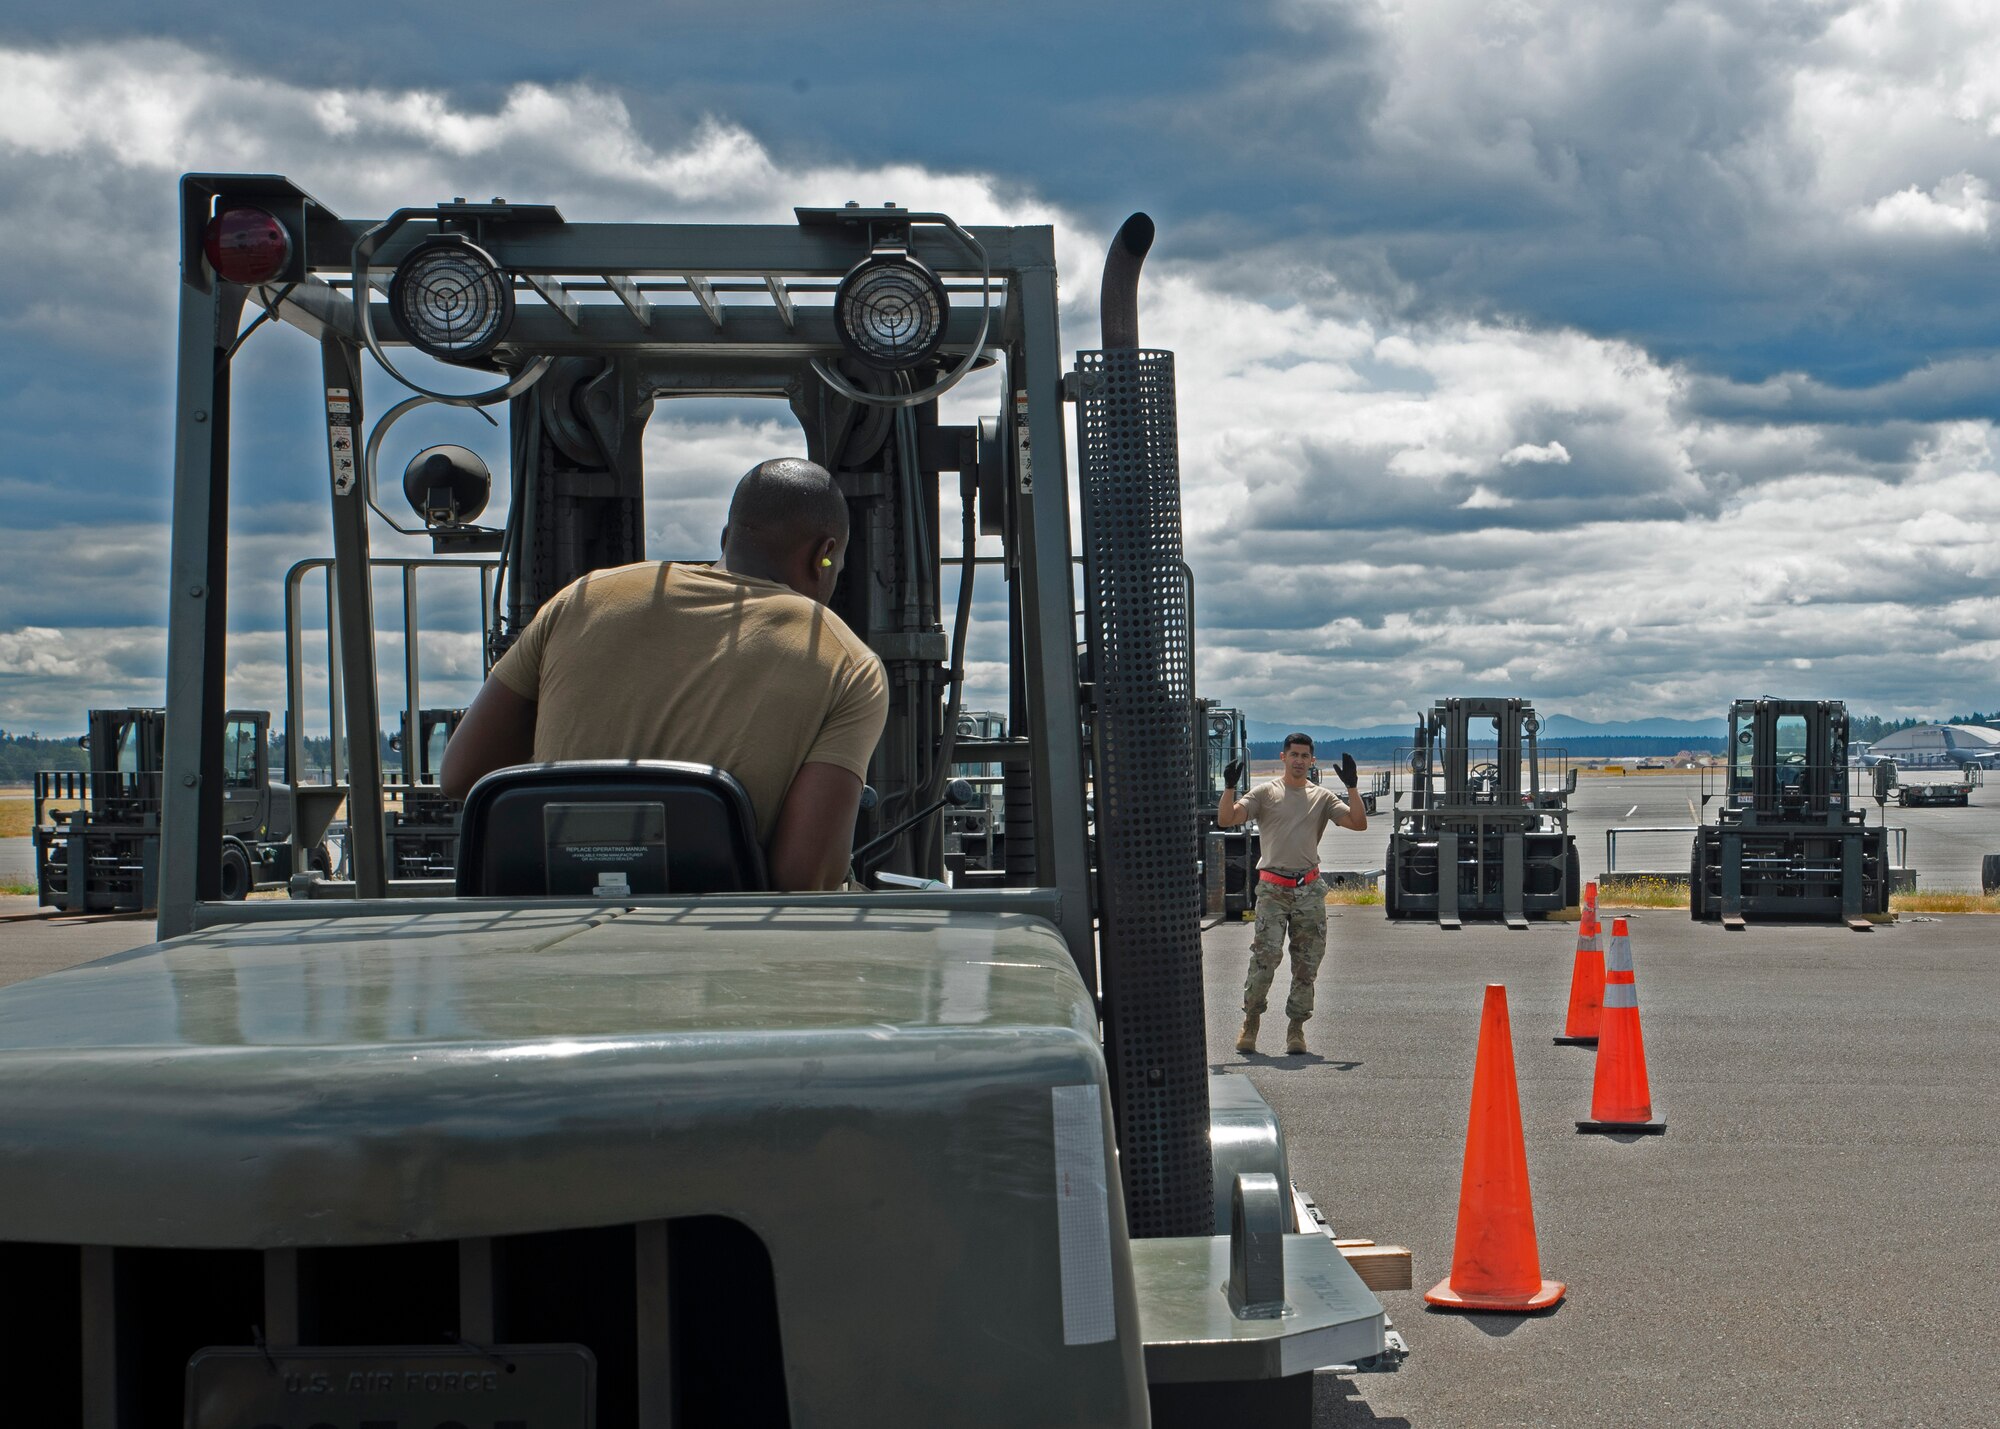 (From left) U.S. Air Force Staff Sgt. Wesley Valentine, passenger service supervisor with the 62nd Aerial Port Squadron, watches the cues from U.S. Air Force Tech. Sgt. Emmanuel Escobar, 62nd APS air freight supervisor, in preparation for the 2021 Pacific Air Forces (PACAF) Port Dawg Rodeo at Joint Base Lewis-McChord, Washington, July 21, 2021. The team will travel to Joint Base Pearl Harbor-Hickam, Hawaii, to compete alongside other aerial port squadrons in five different events; a pallet build-up, 10K forklift skills course, center of balance marking and knowledge test, an aircraft upload and a combat fitness challenge. (U.S. Air Force photo by Senior Airman Zoe Thacker)